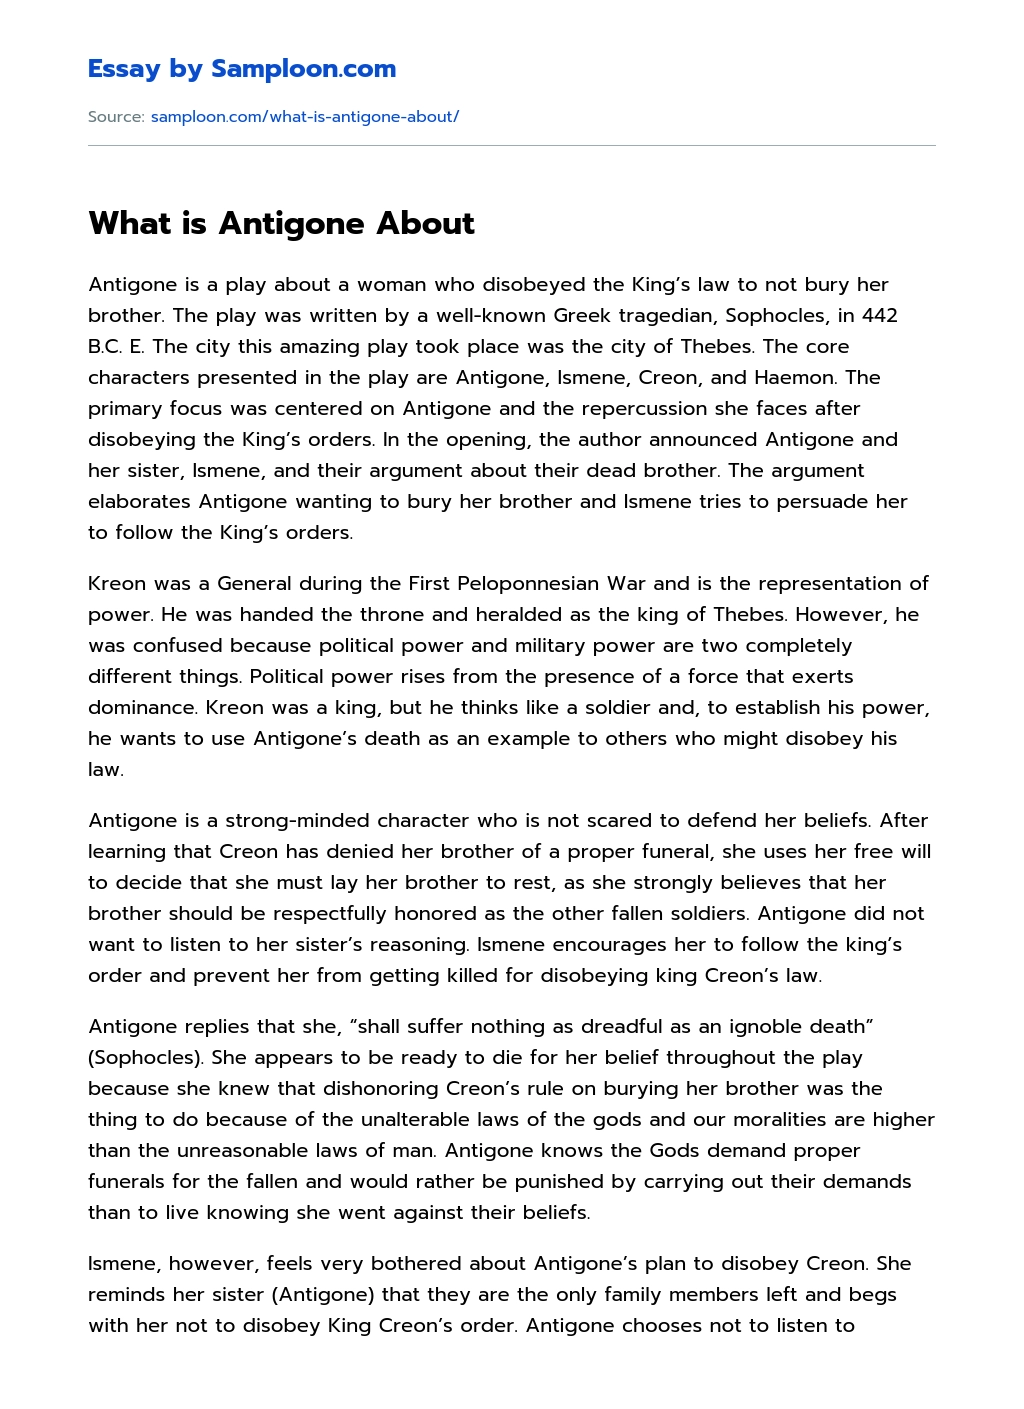 What is Antigone About essay